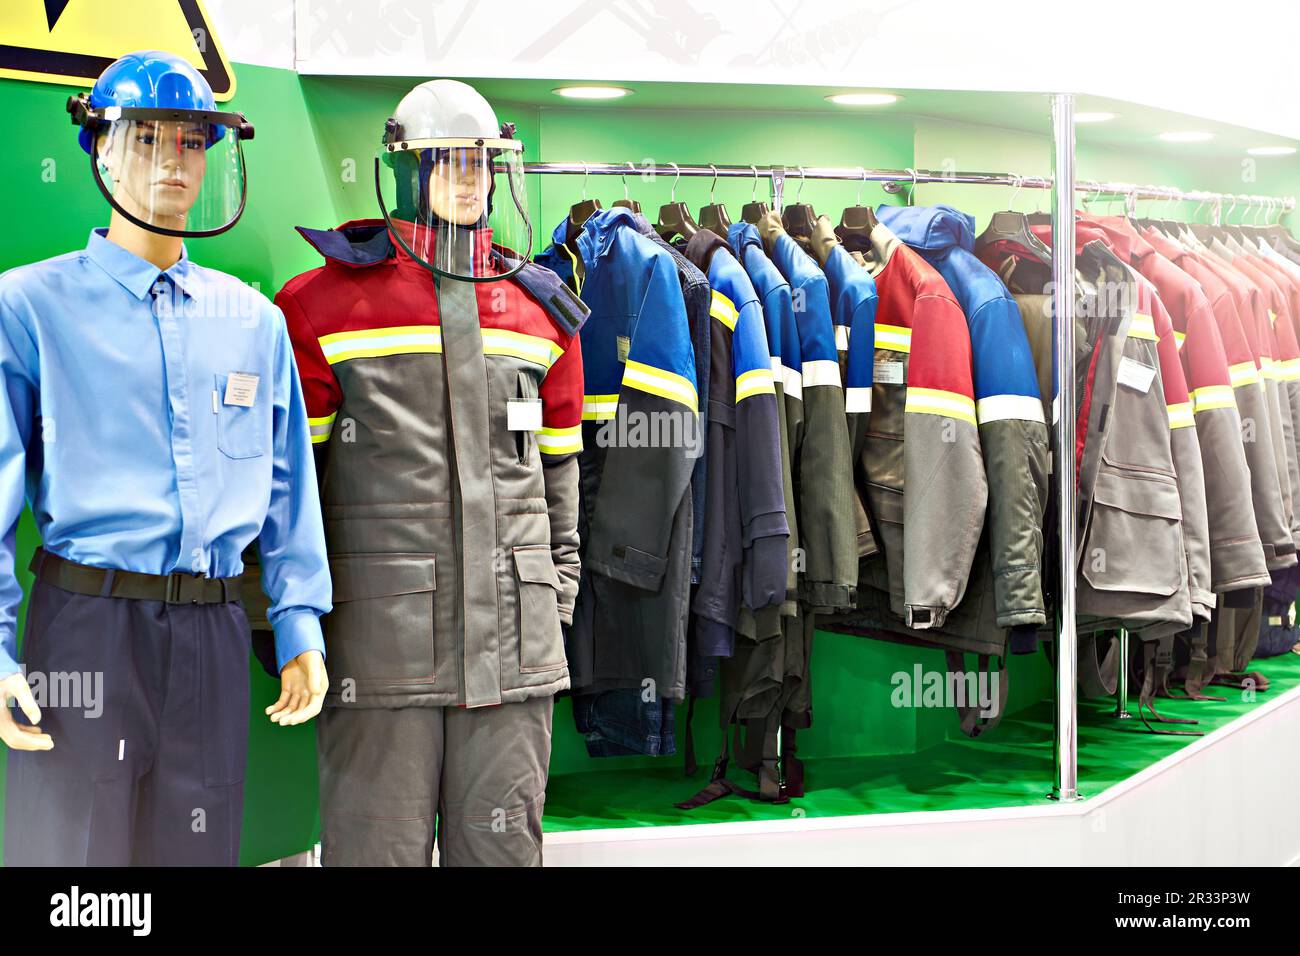 Jackets for workwear for builders and industry Stock Photo - Alamy